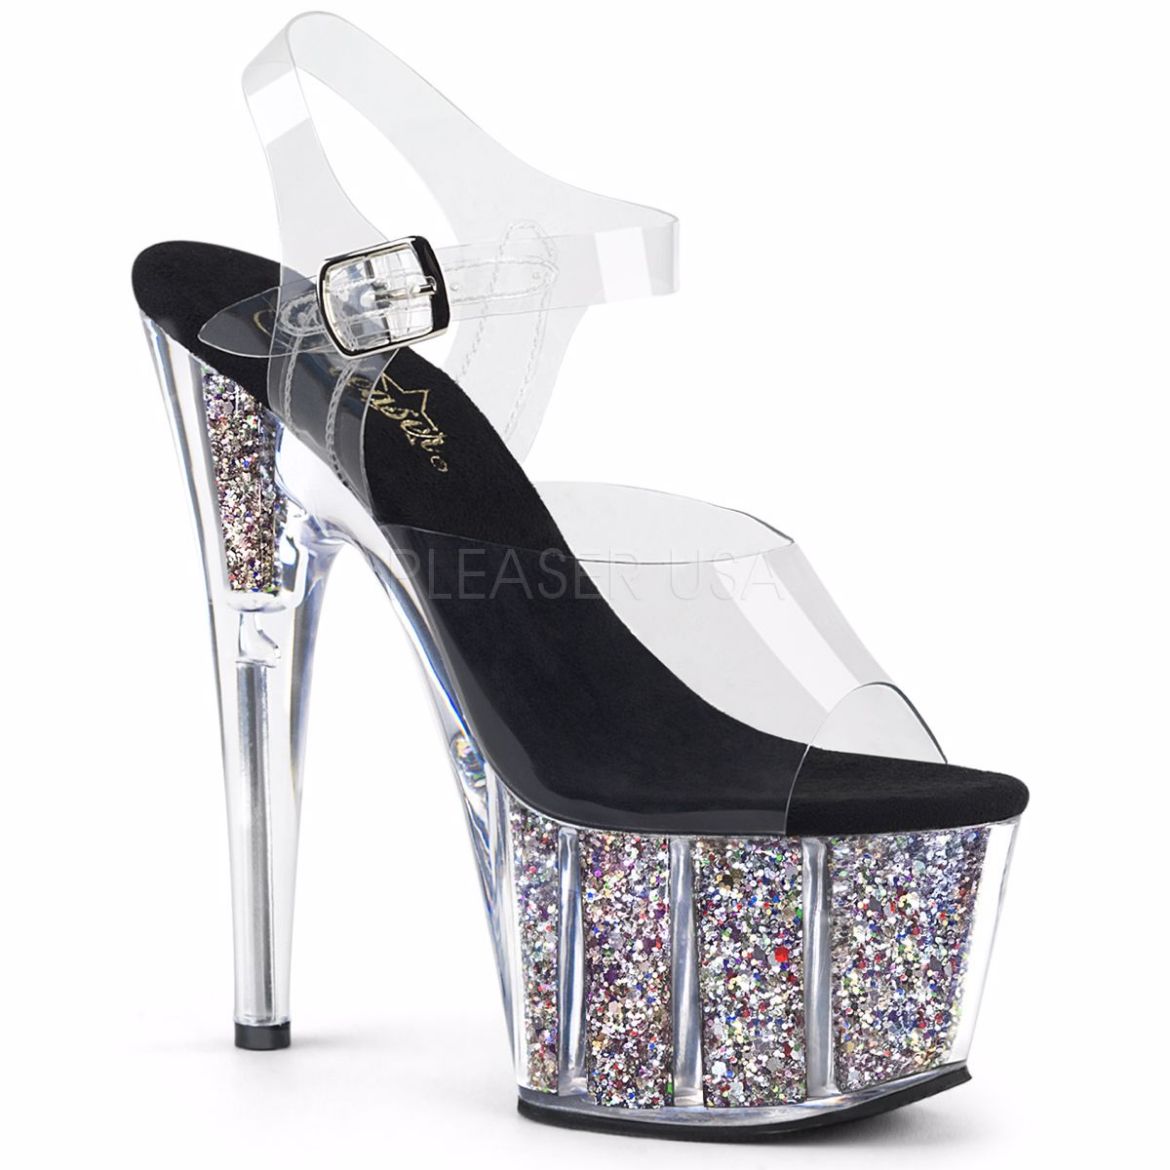 Product image of Pleaser Adore-708Cg Clear/Silver Confetti Glitter, 7 inch (17.8 cm) Heel, 2 3/4 inch (7 cm) Platform Sandal Shoes